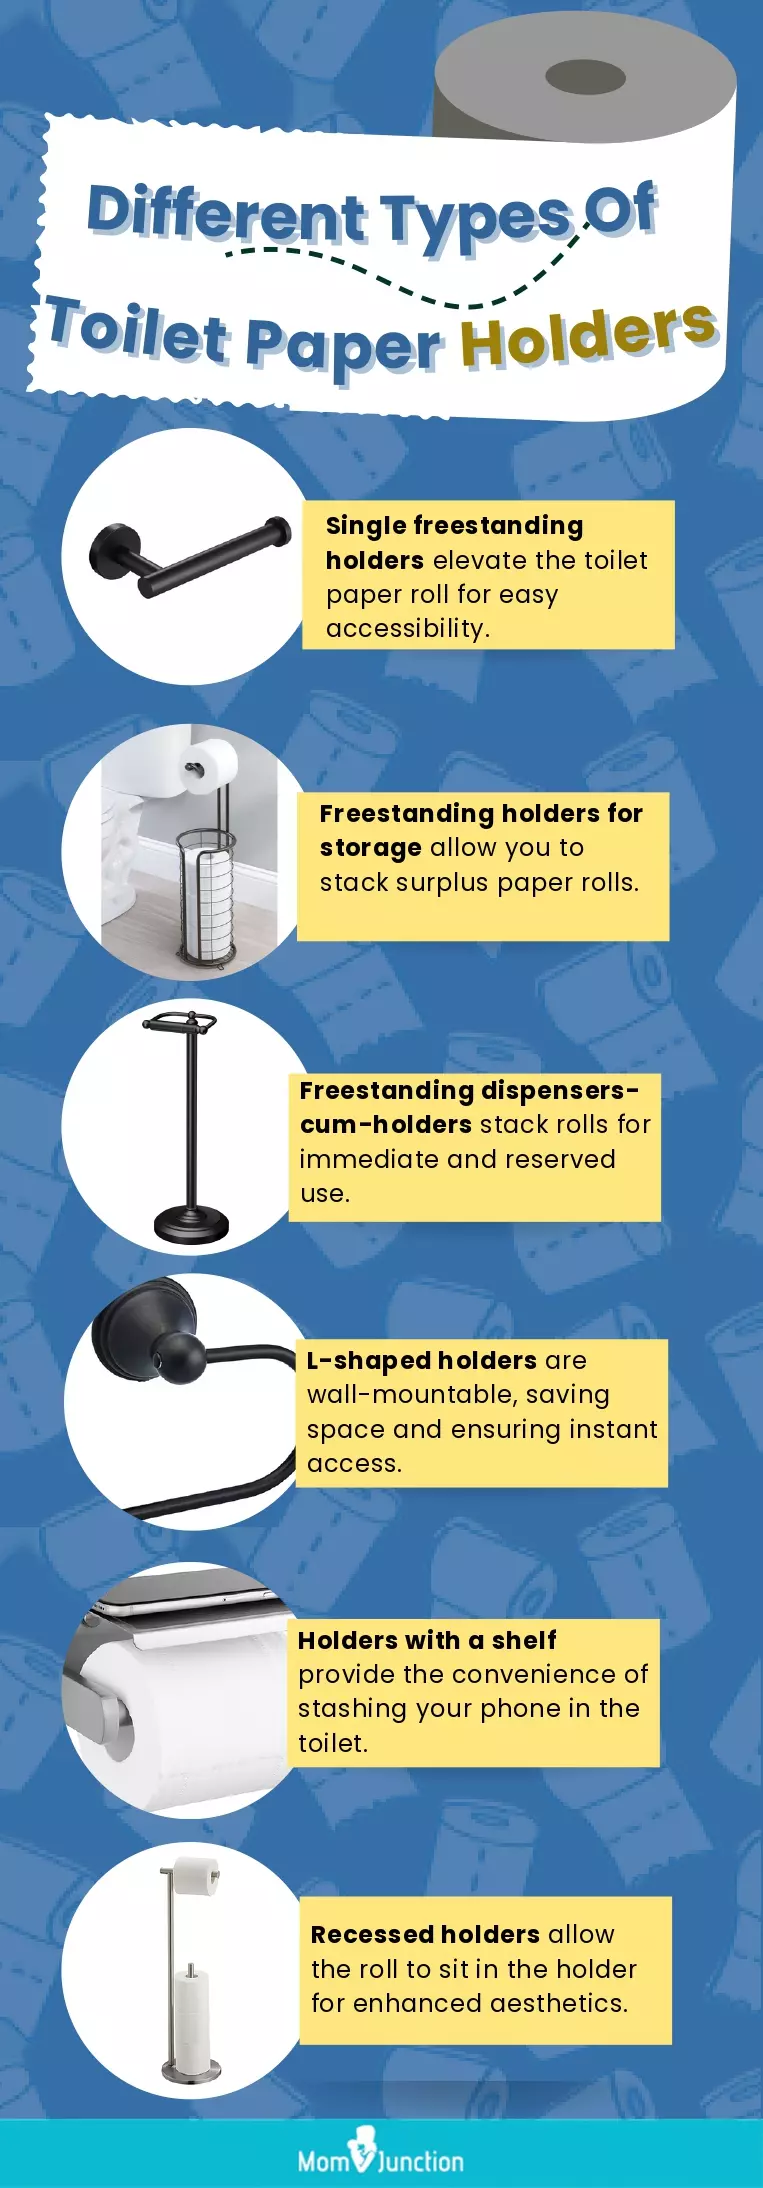 Different Types Of Toilet Paper Holders (infographic)